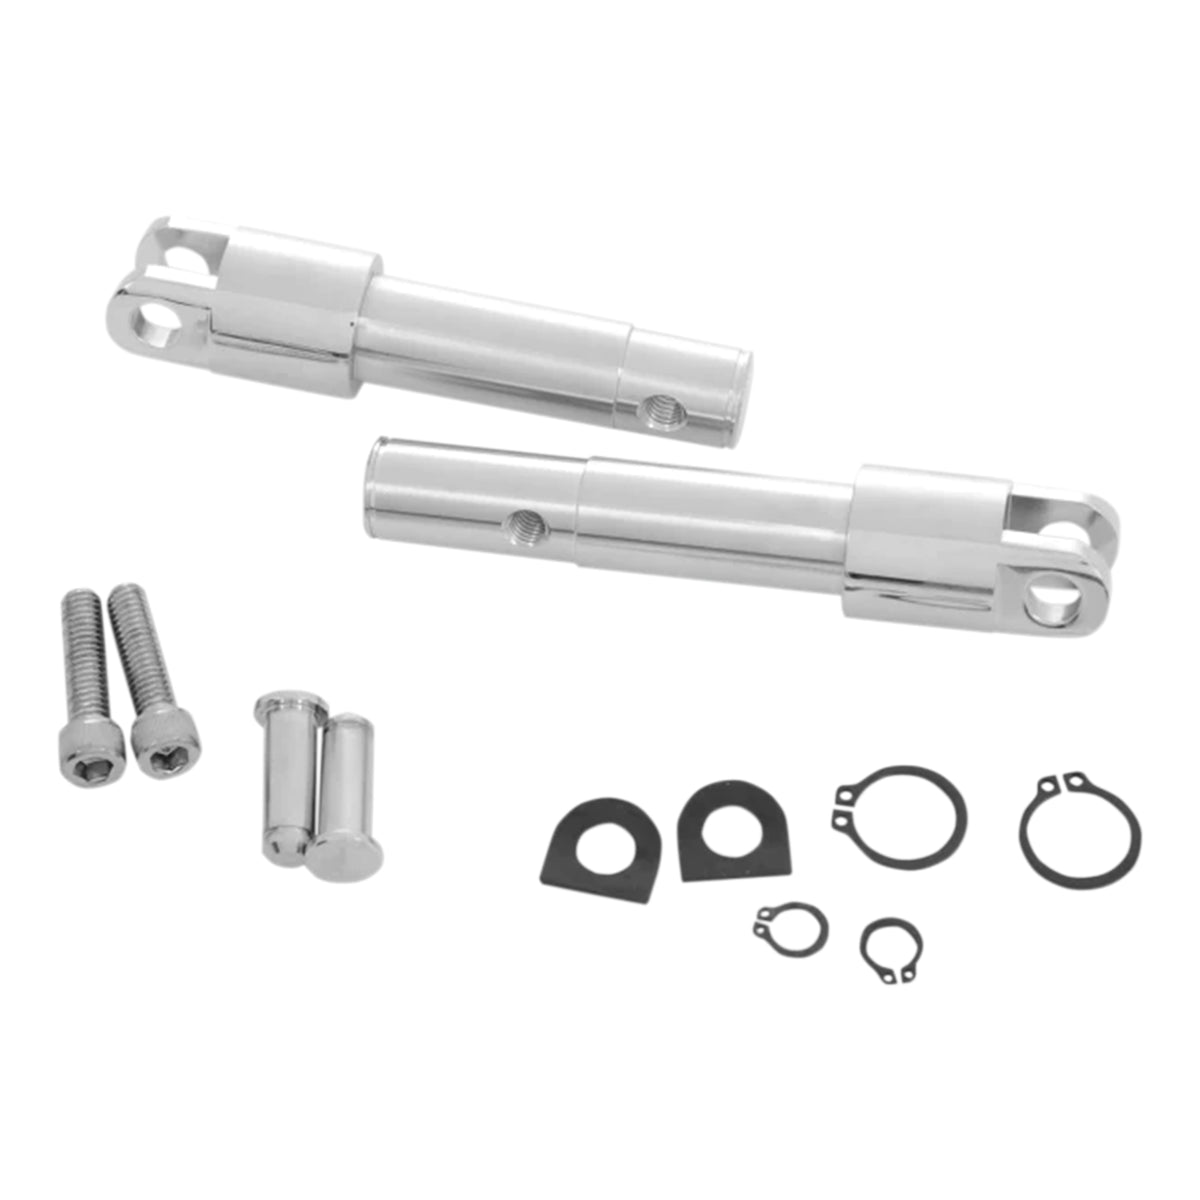 Sportsters 2011-2019 Forward Control Conversion Kit